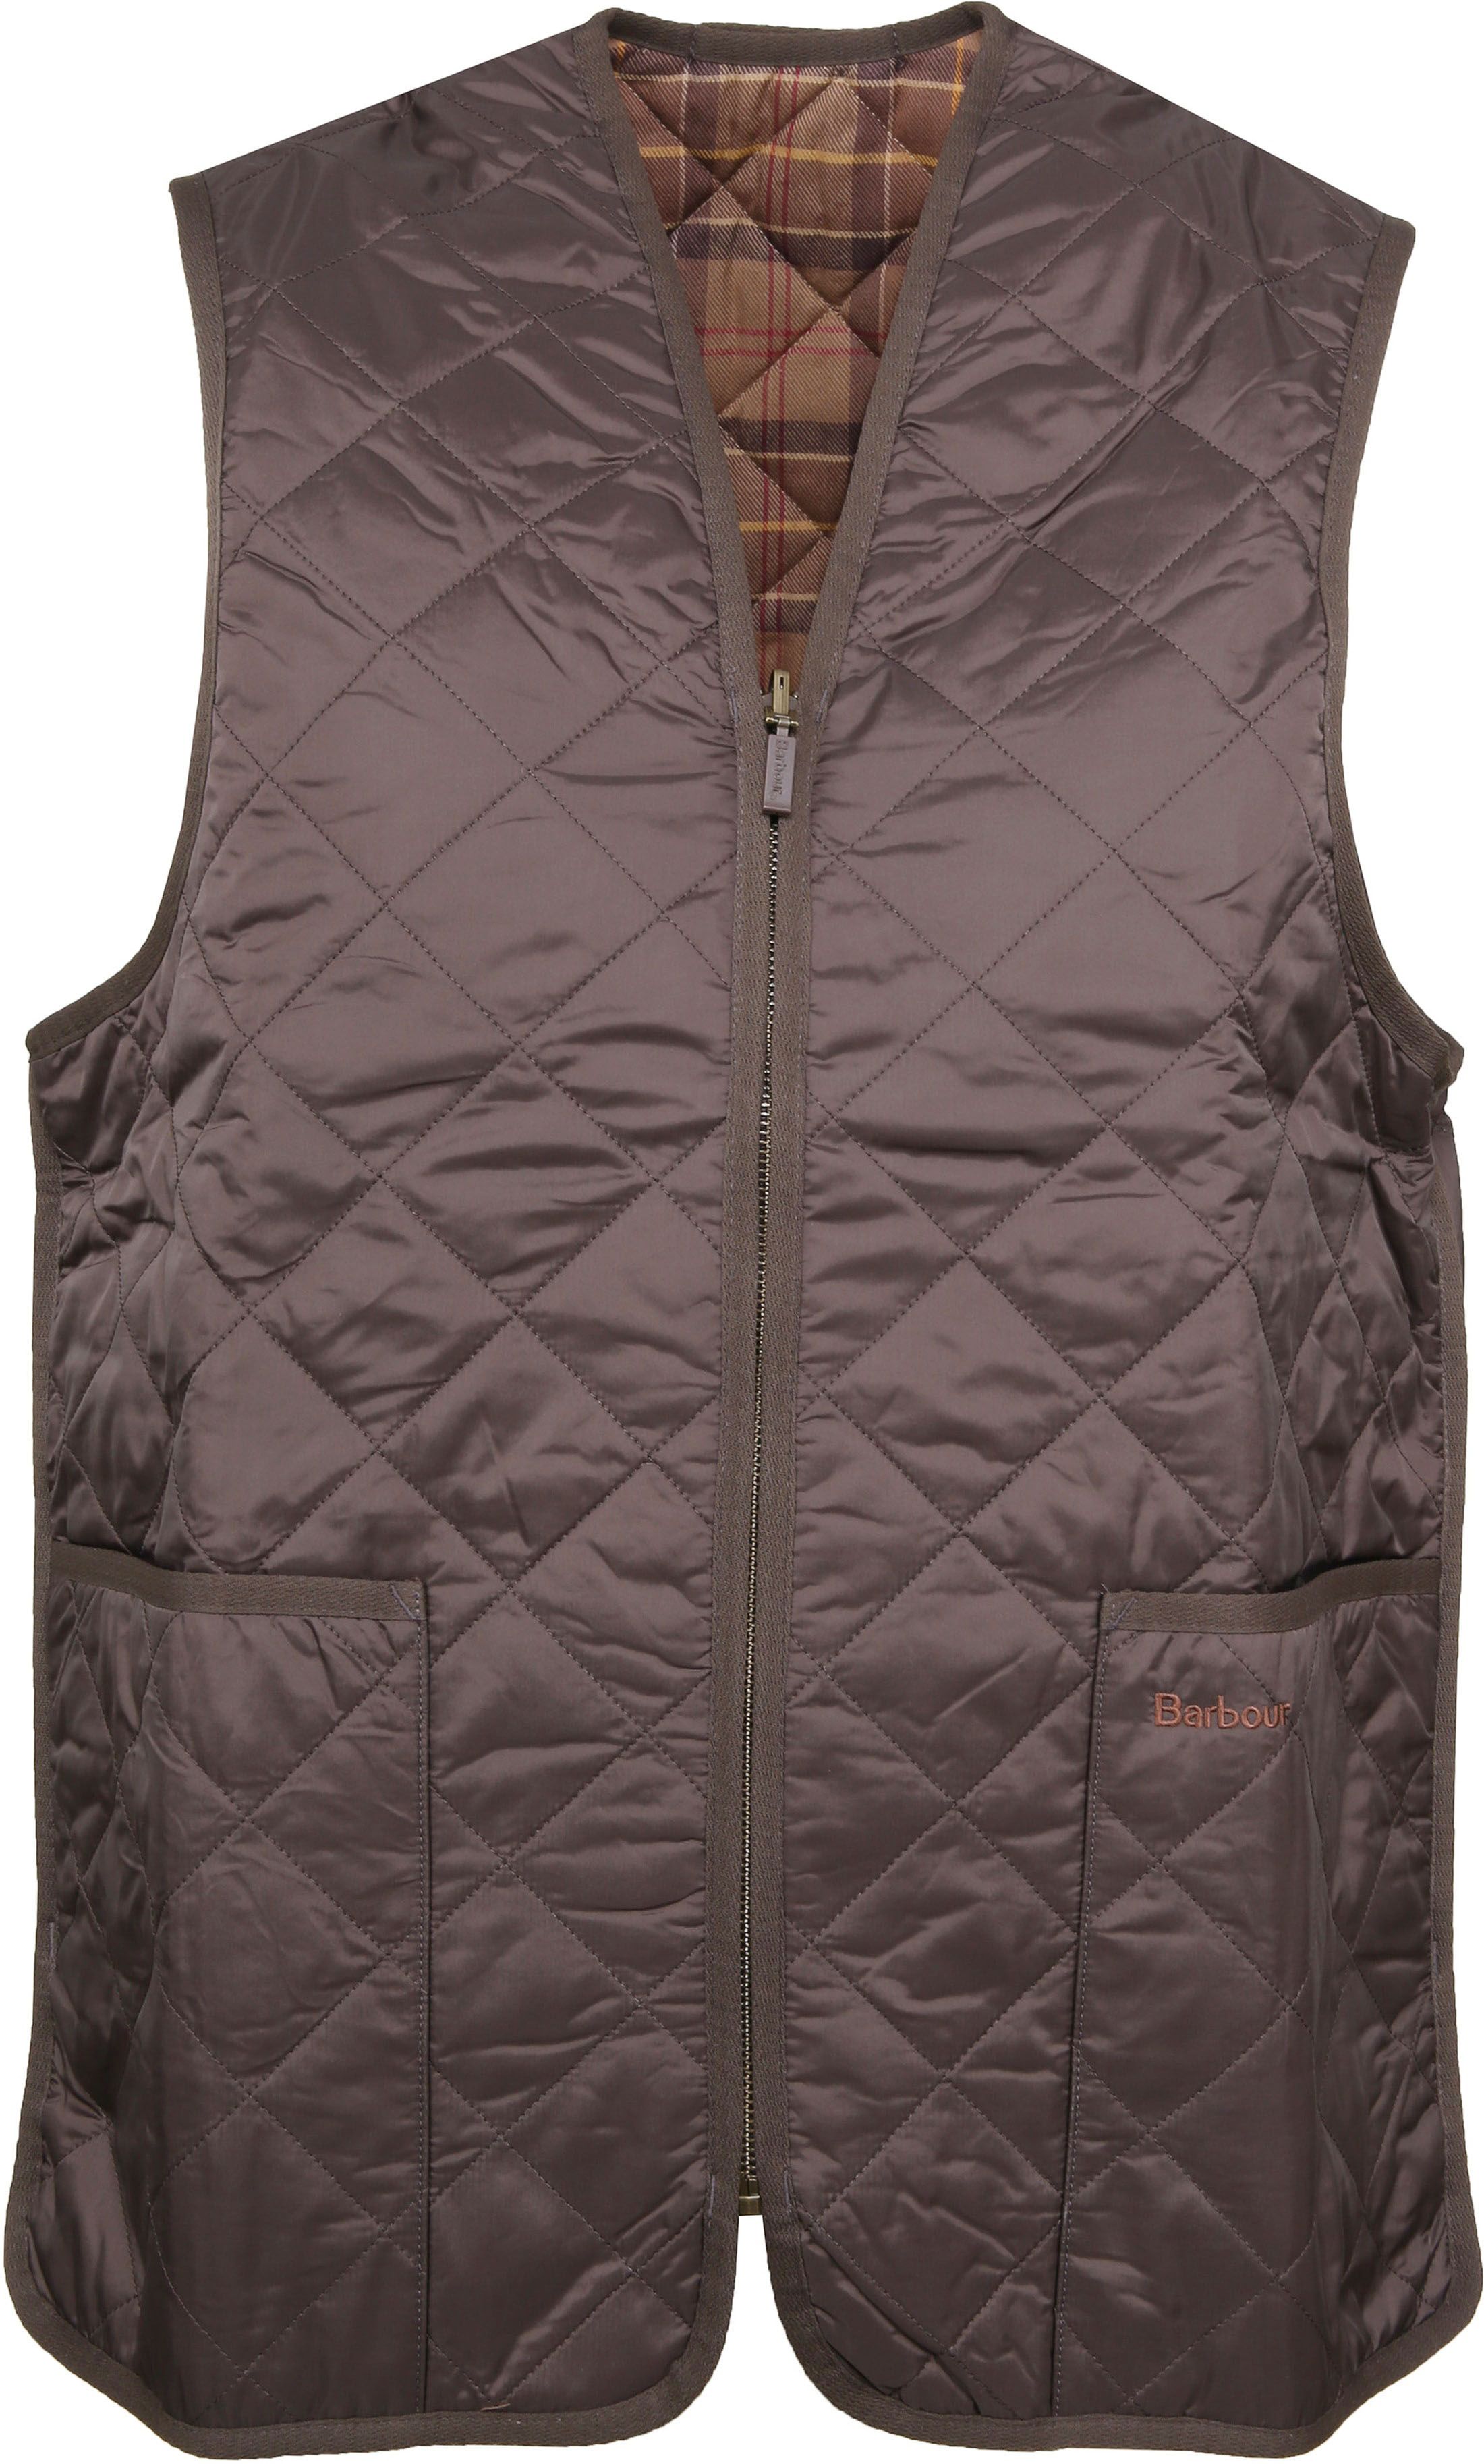 Barbour Waistcoat Brown size 38-R